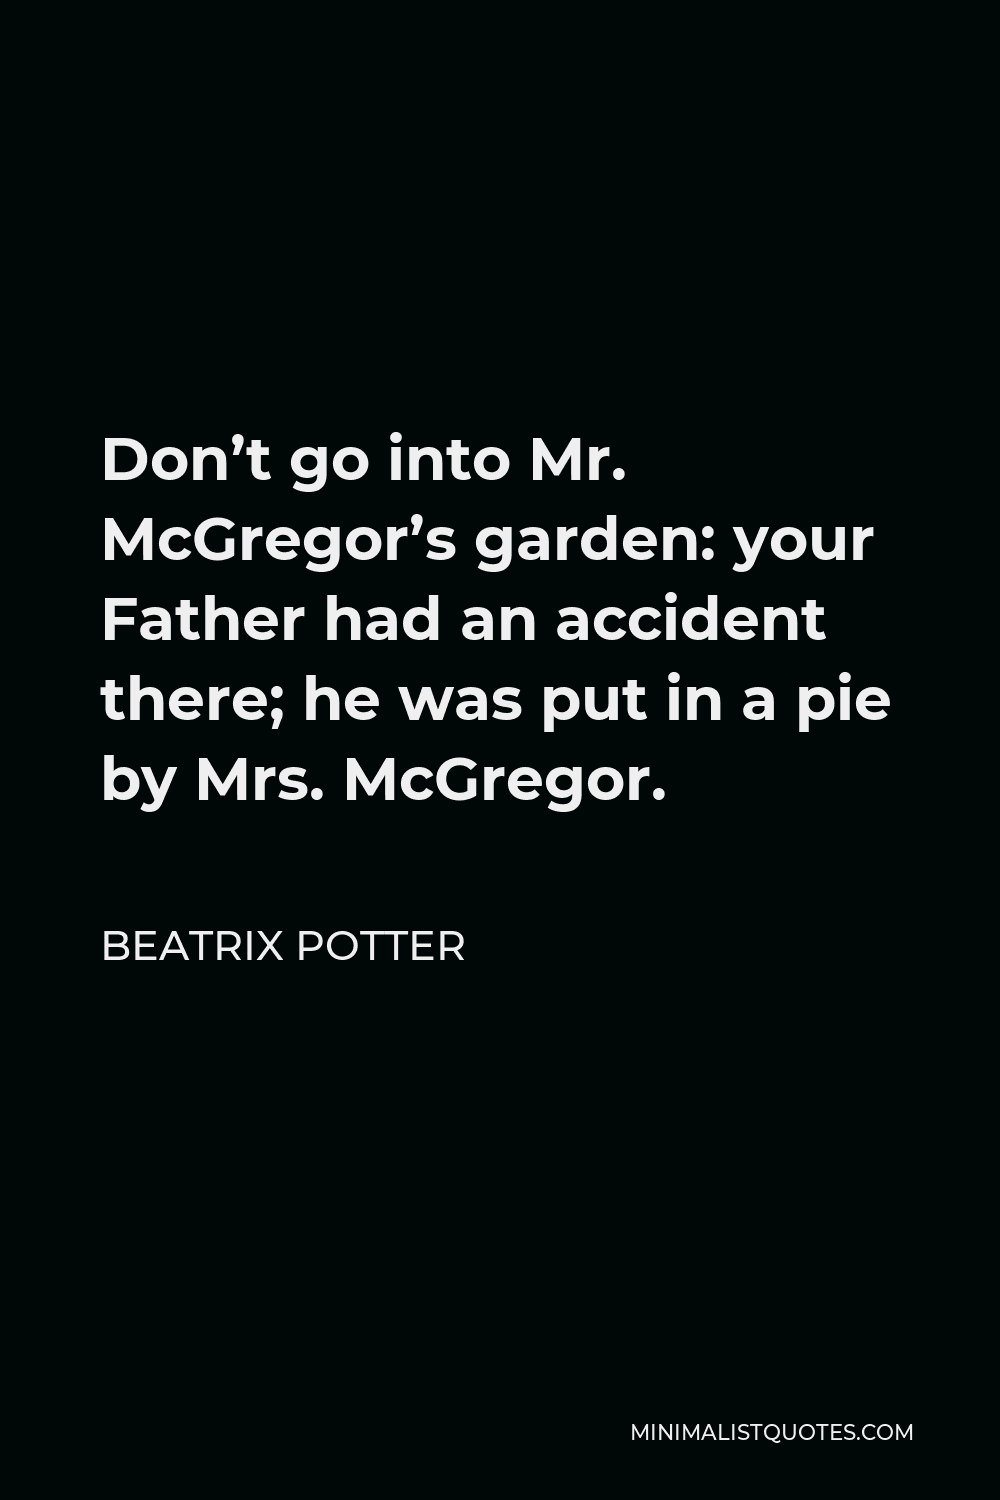 Beatrix Potter Quote - Don’t go into Mr. McGregor’s garden: your Father had an accident there; he was put in a pie by Mrs. McGregor.